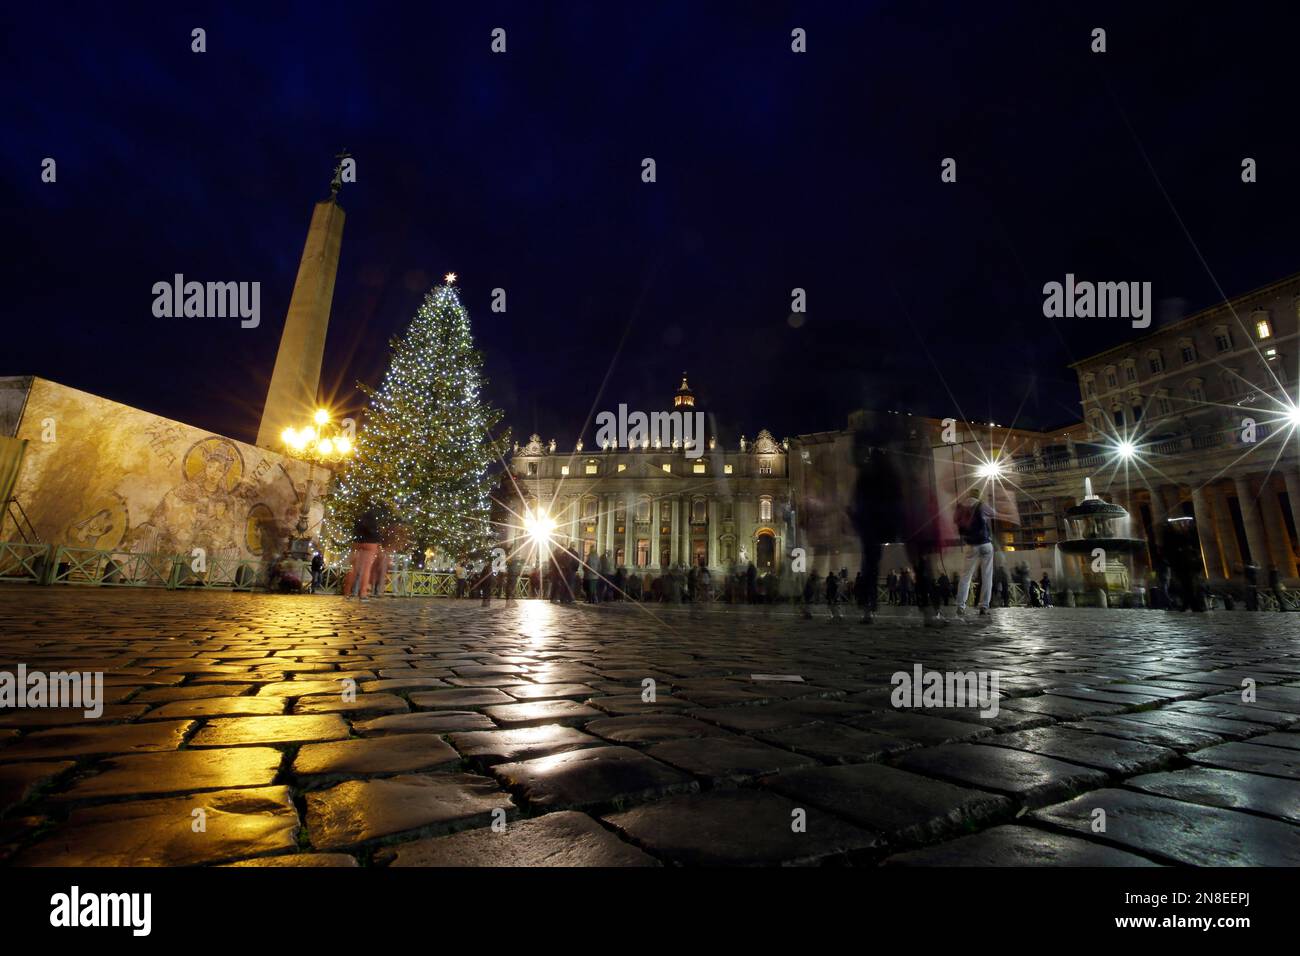 The 24 meters (78.74 feet) Christmas tree is lit in St. Peter's square at  the Vatican, Friday, Dec. 14, 2012. The Christmas season kicks off Friday  at the Vatican with the traditional